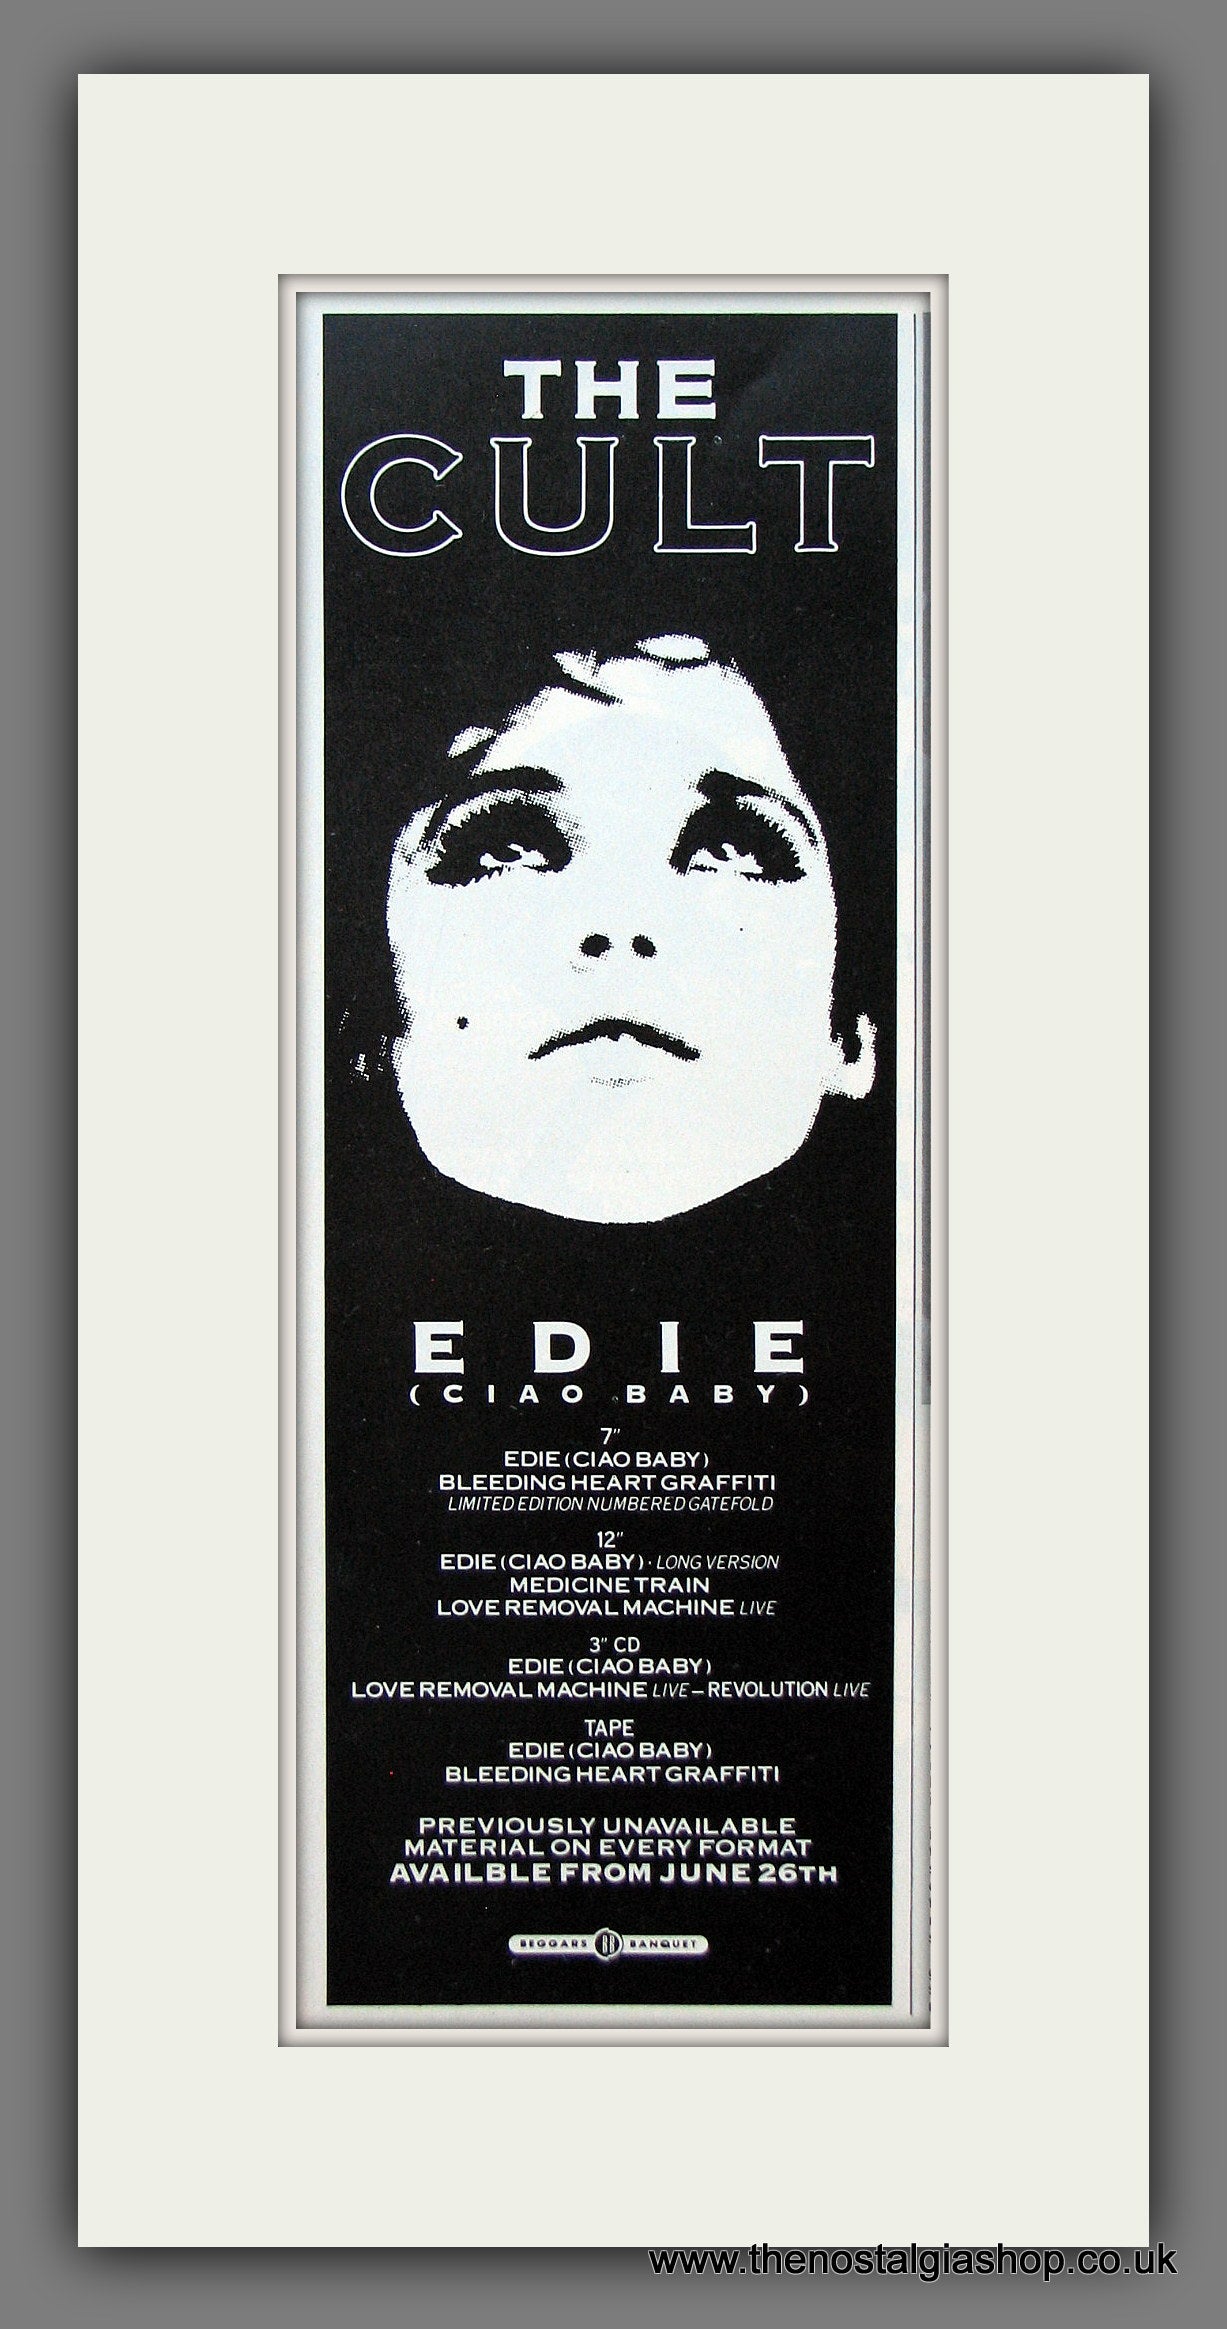 Cult (The) Edie, Ciao Baby. Original Advert 1989 (ref AD400019)